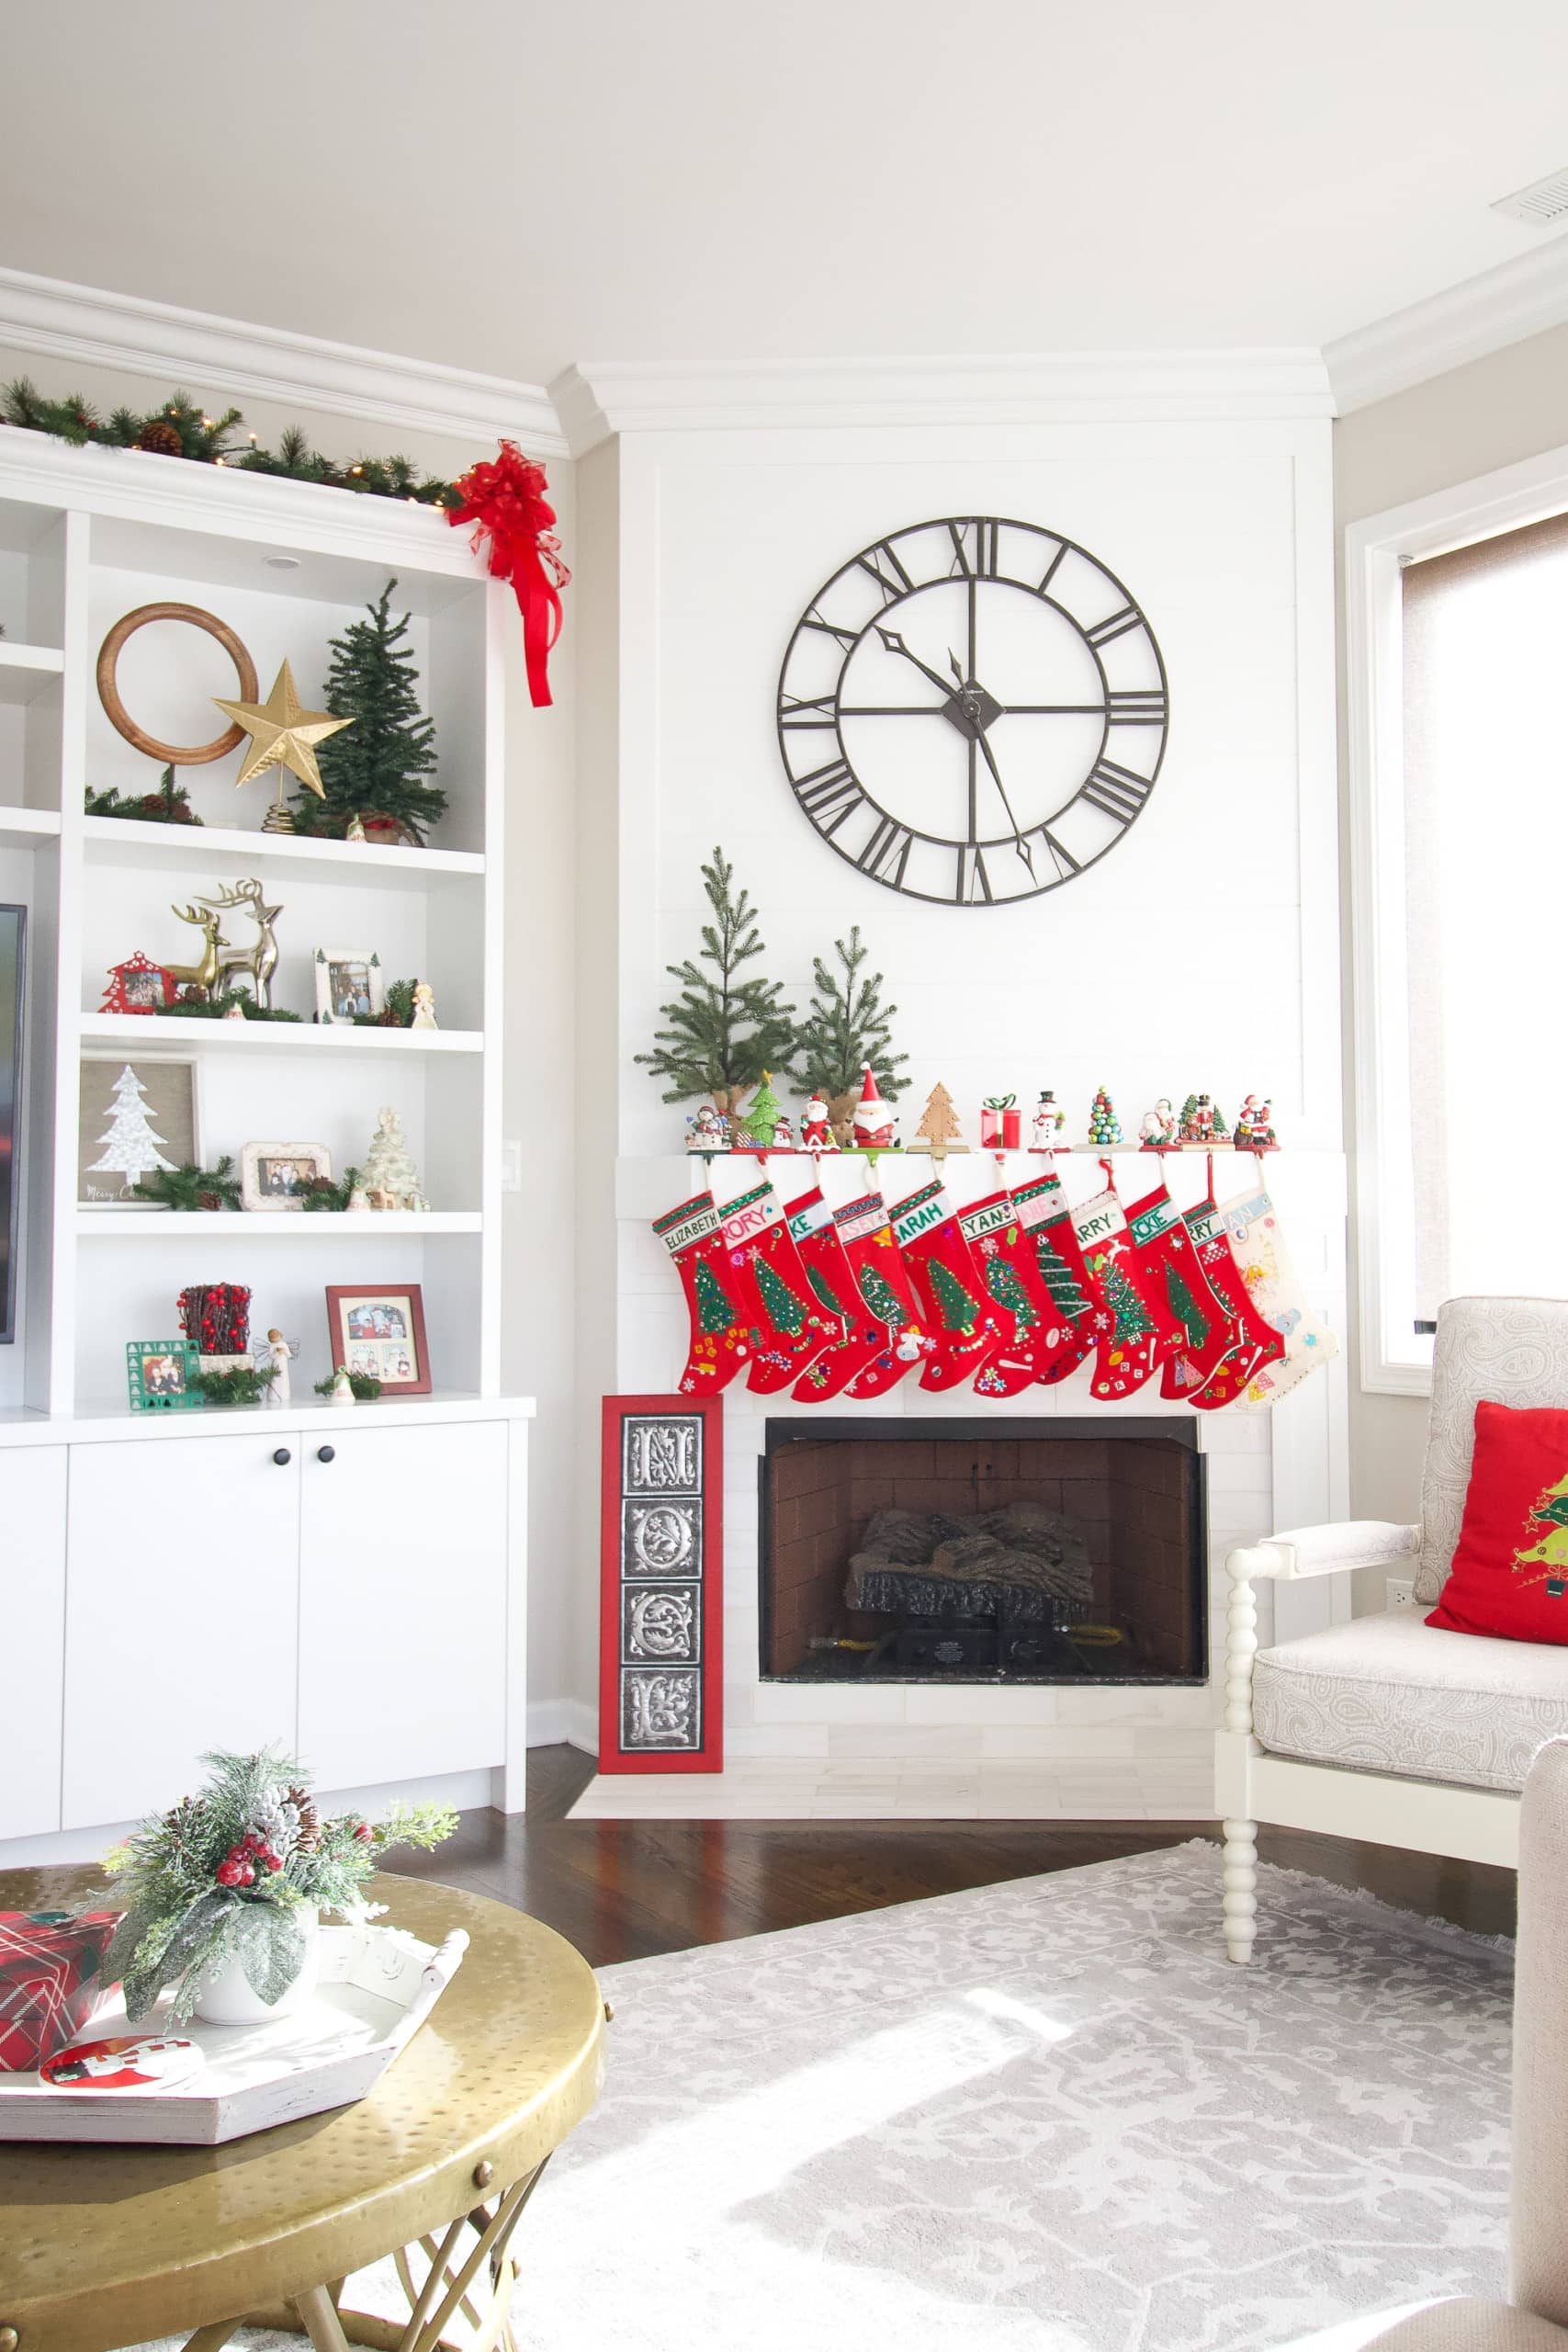 Adding reds stockings to a fireplace